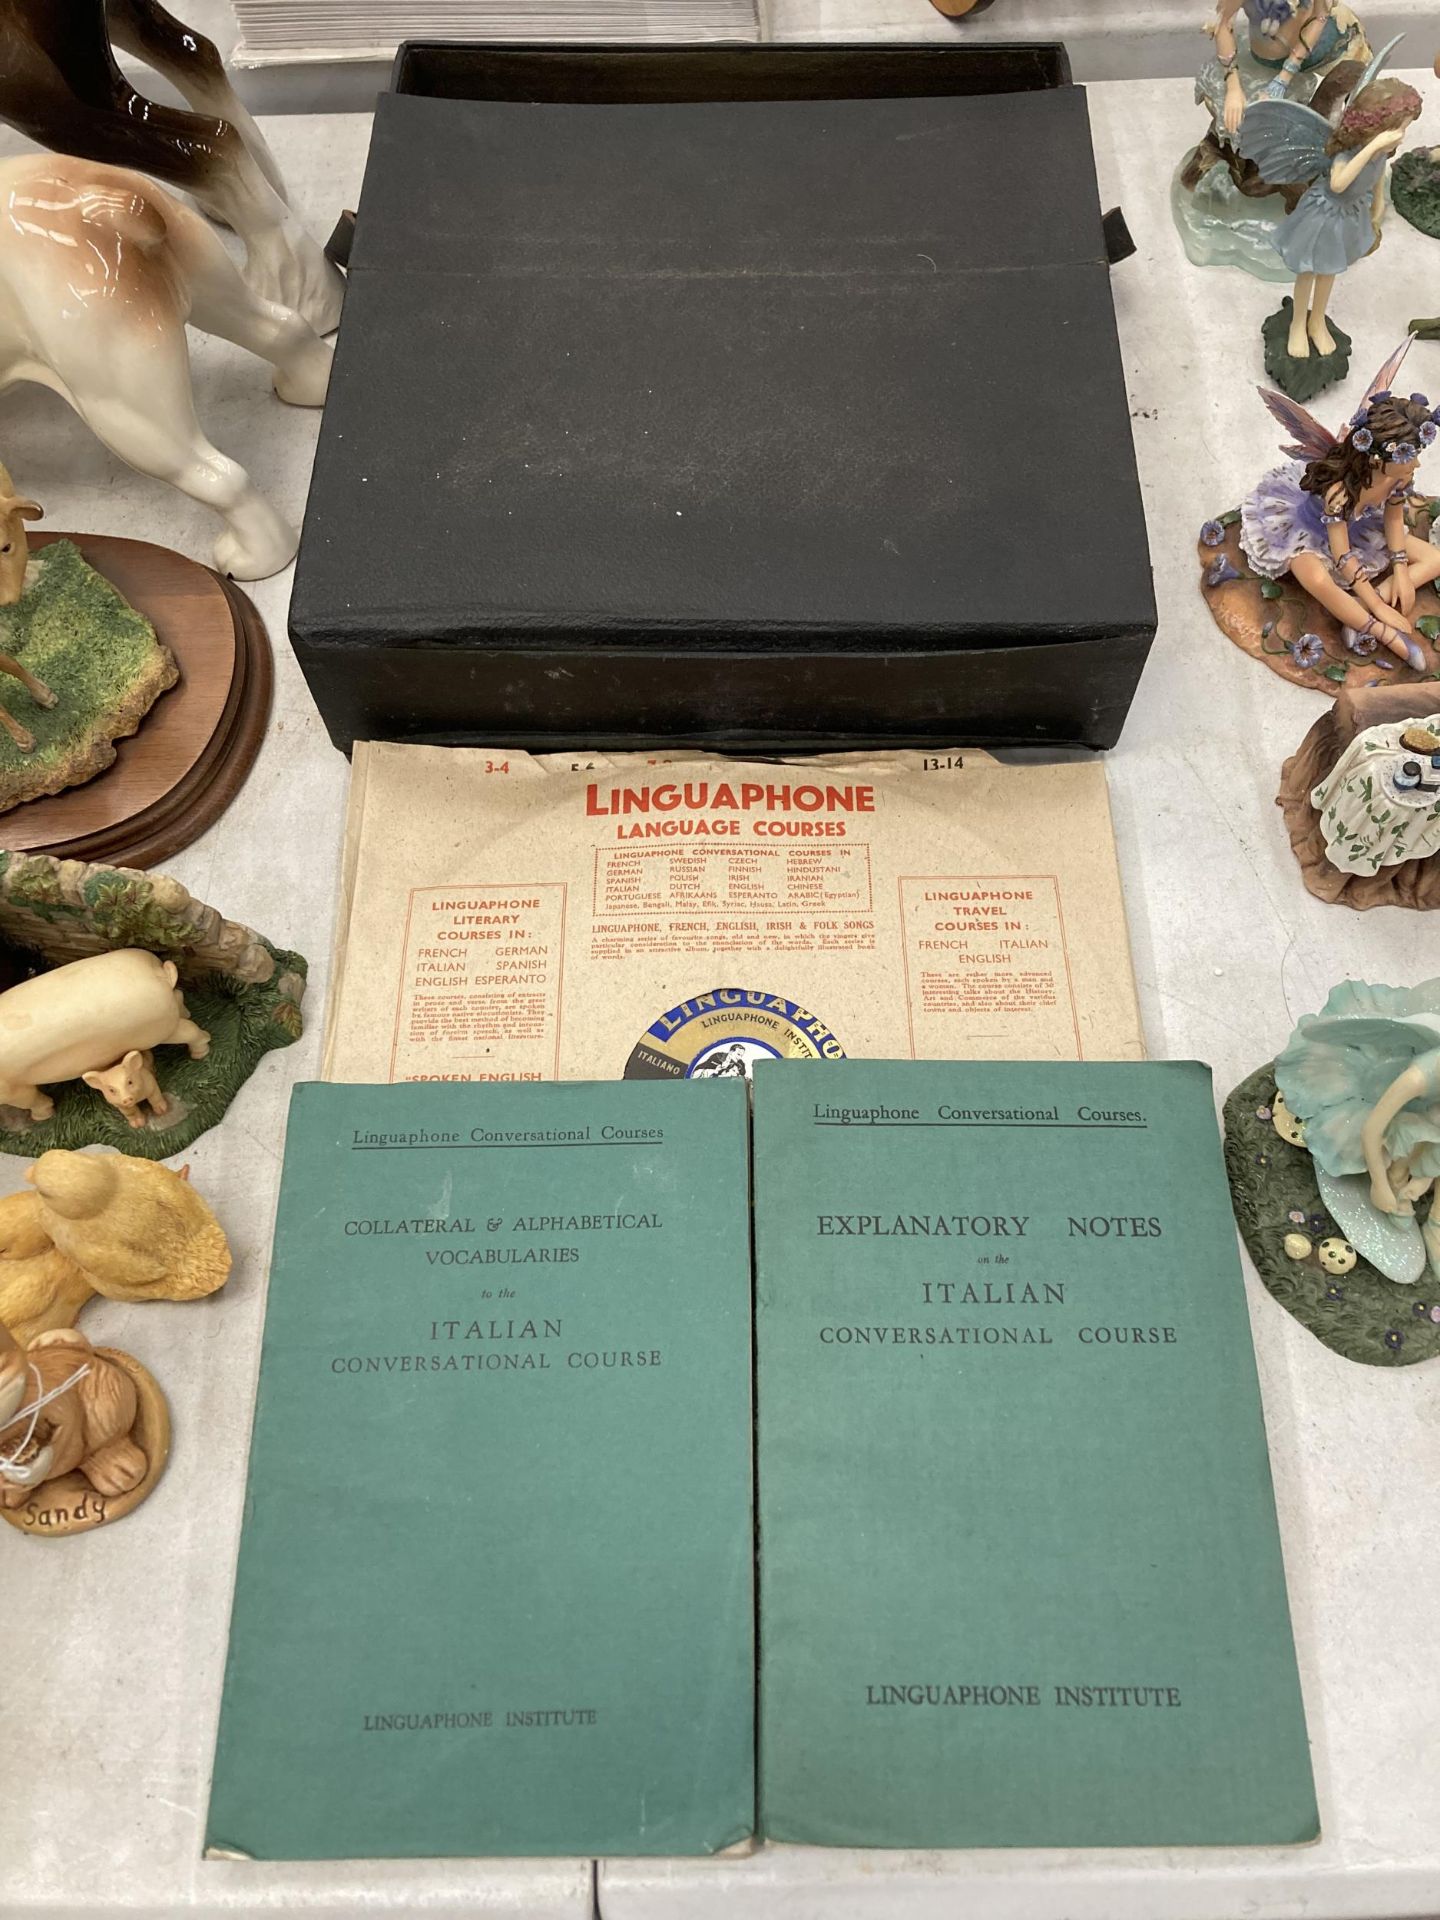 A CASED LINGUAPHONE LANGUAGE RECORDS AND BOOKS